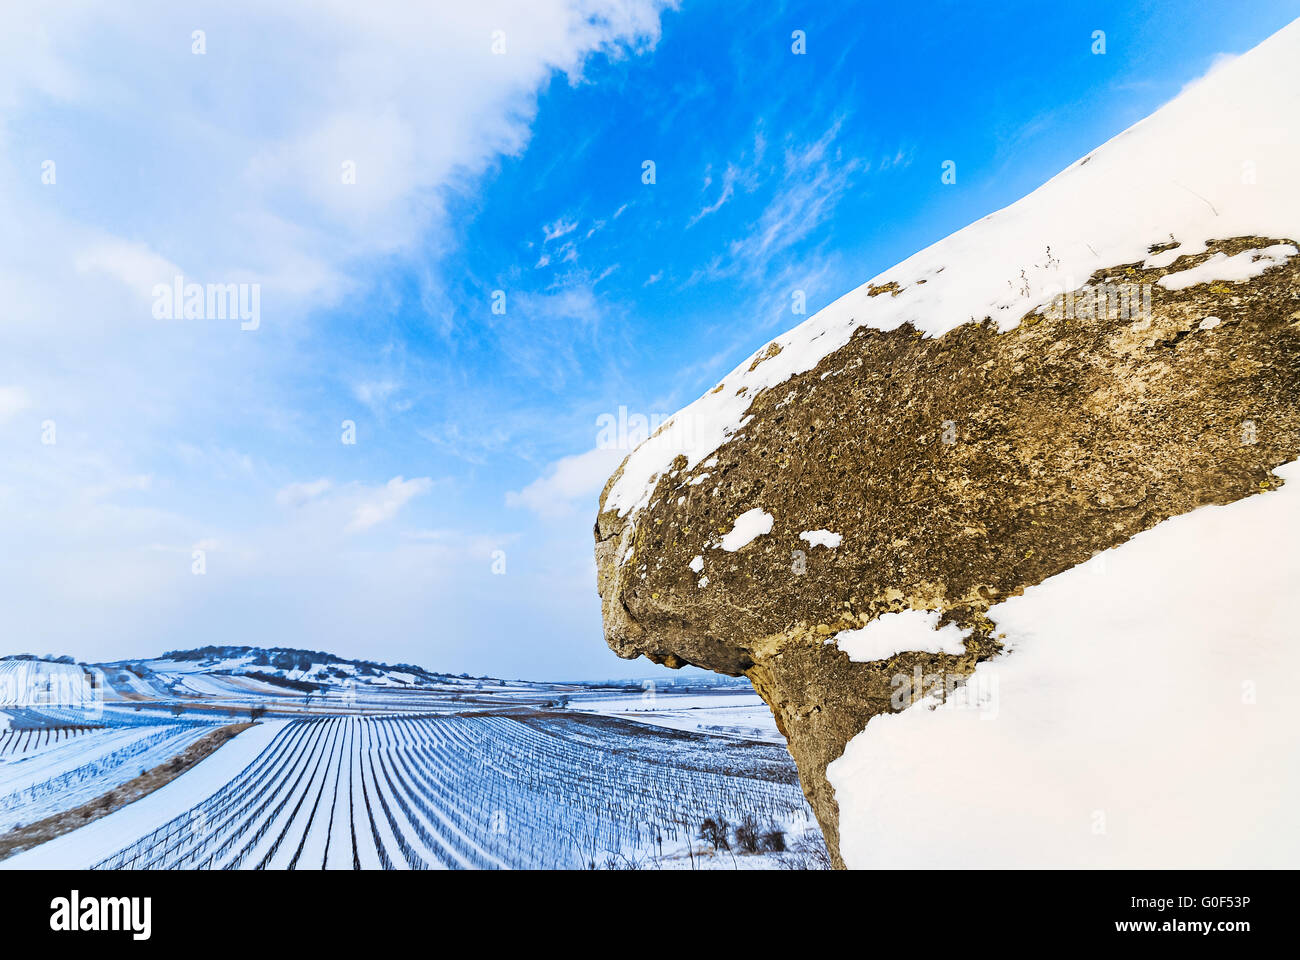 Winter landscape with vineyard and rocks in Oggau Stock Photo